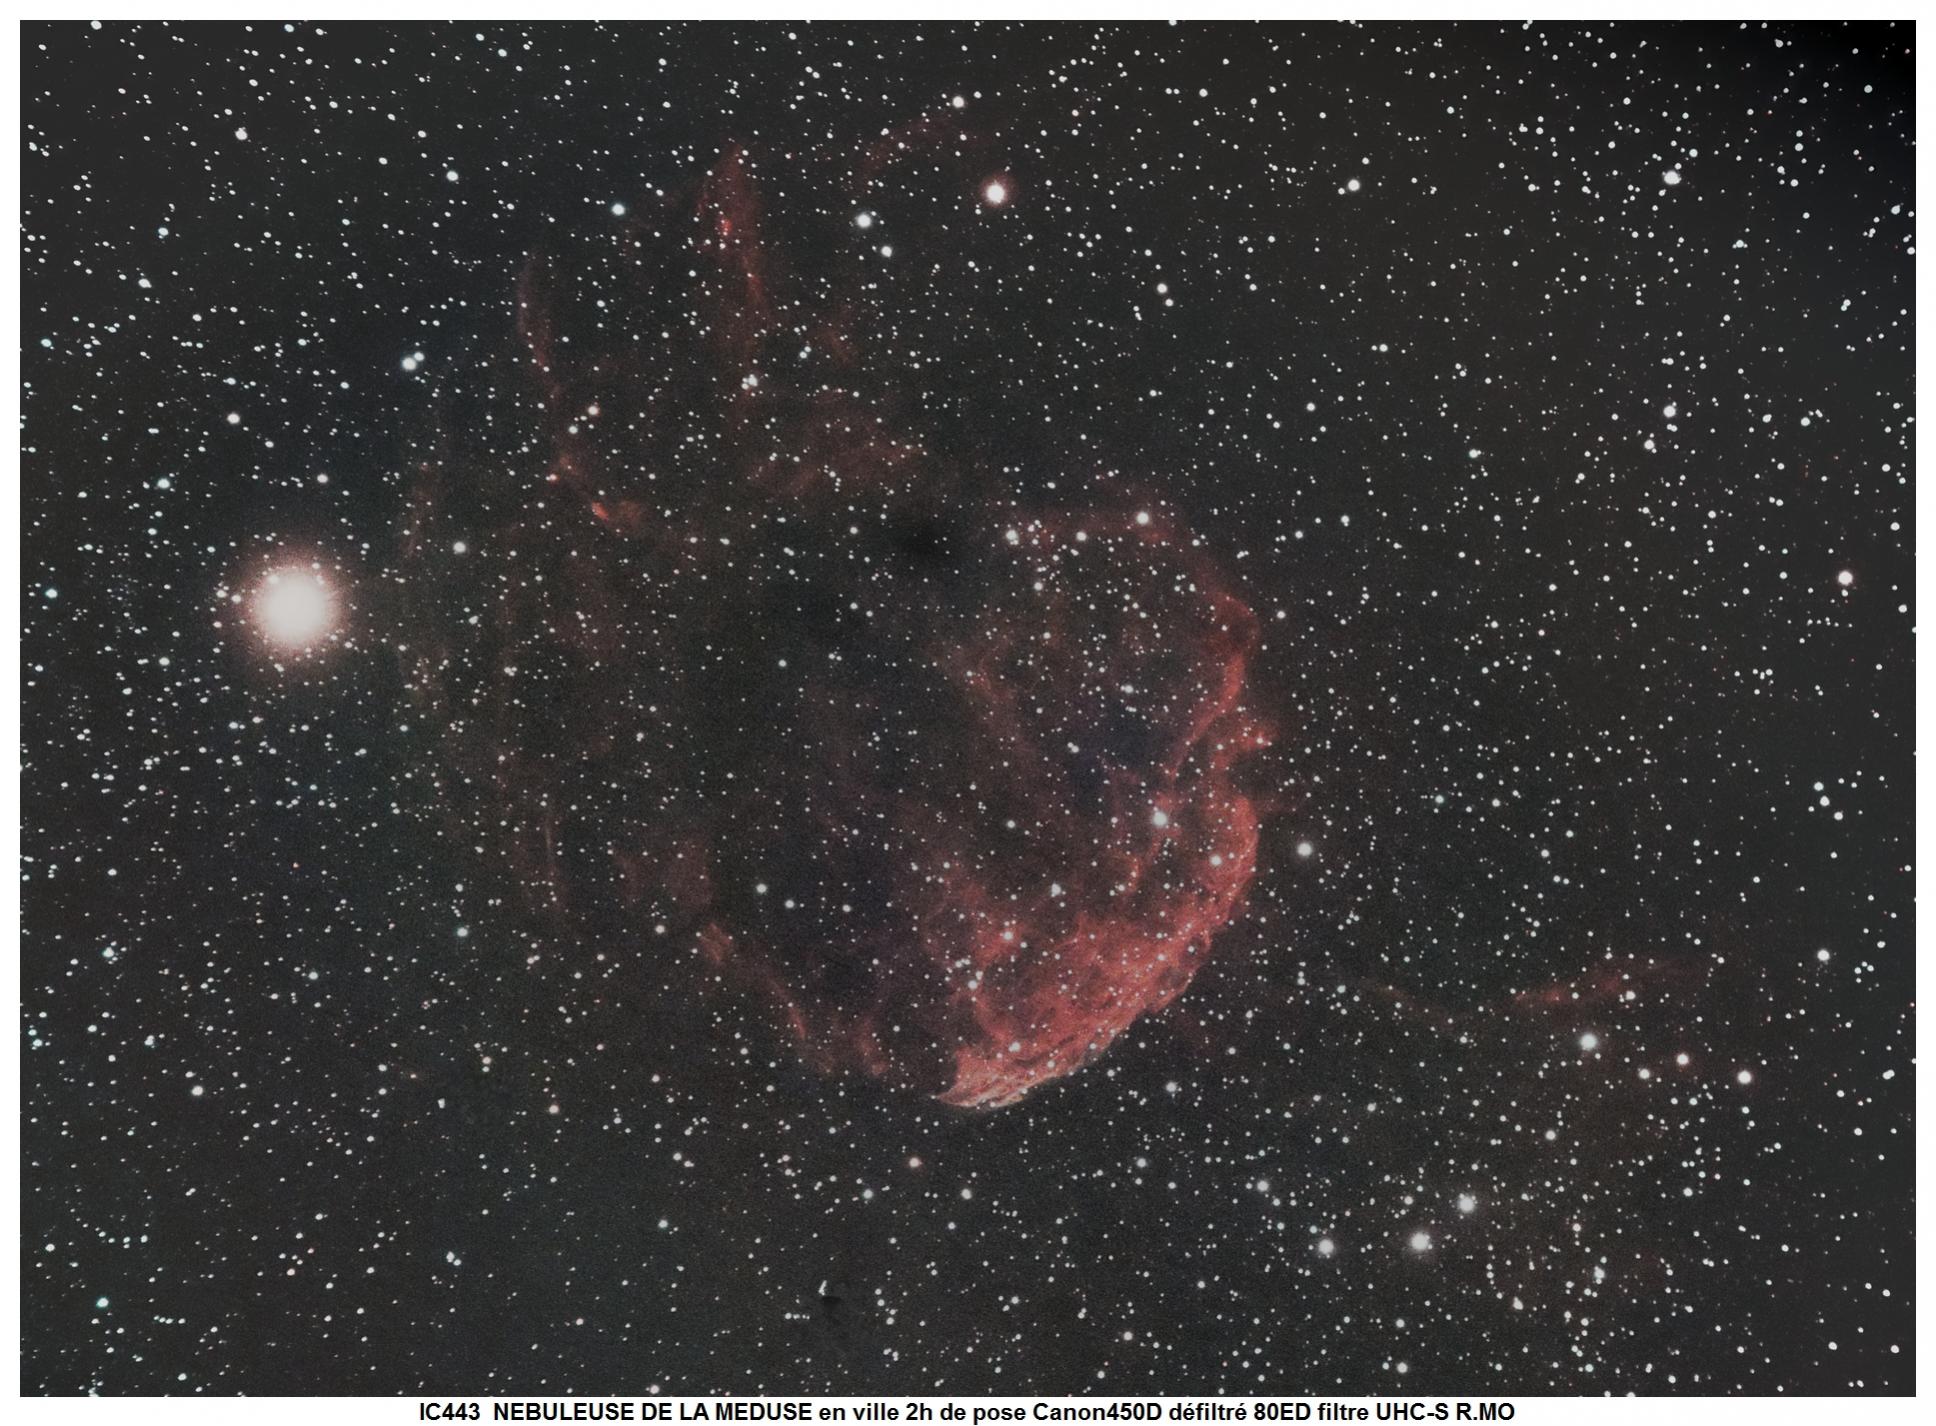 Nom : IC444_07_01_2016_CANON450D_1600ISO_1_DxO-1.jpg
Affichages : 59
Taille : 373,2 Ko